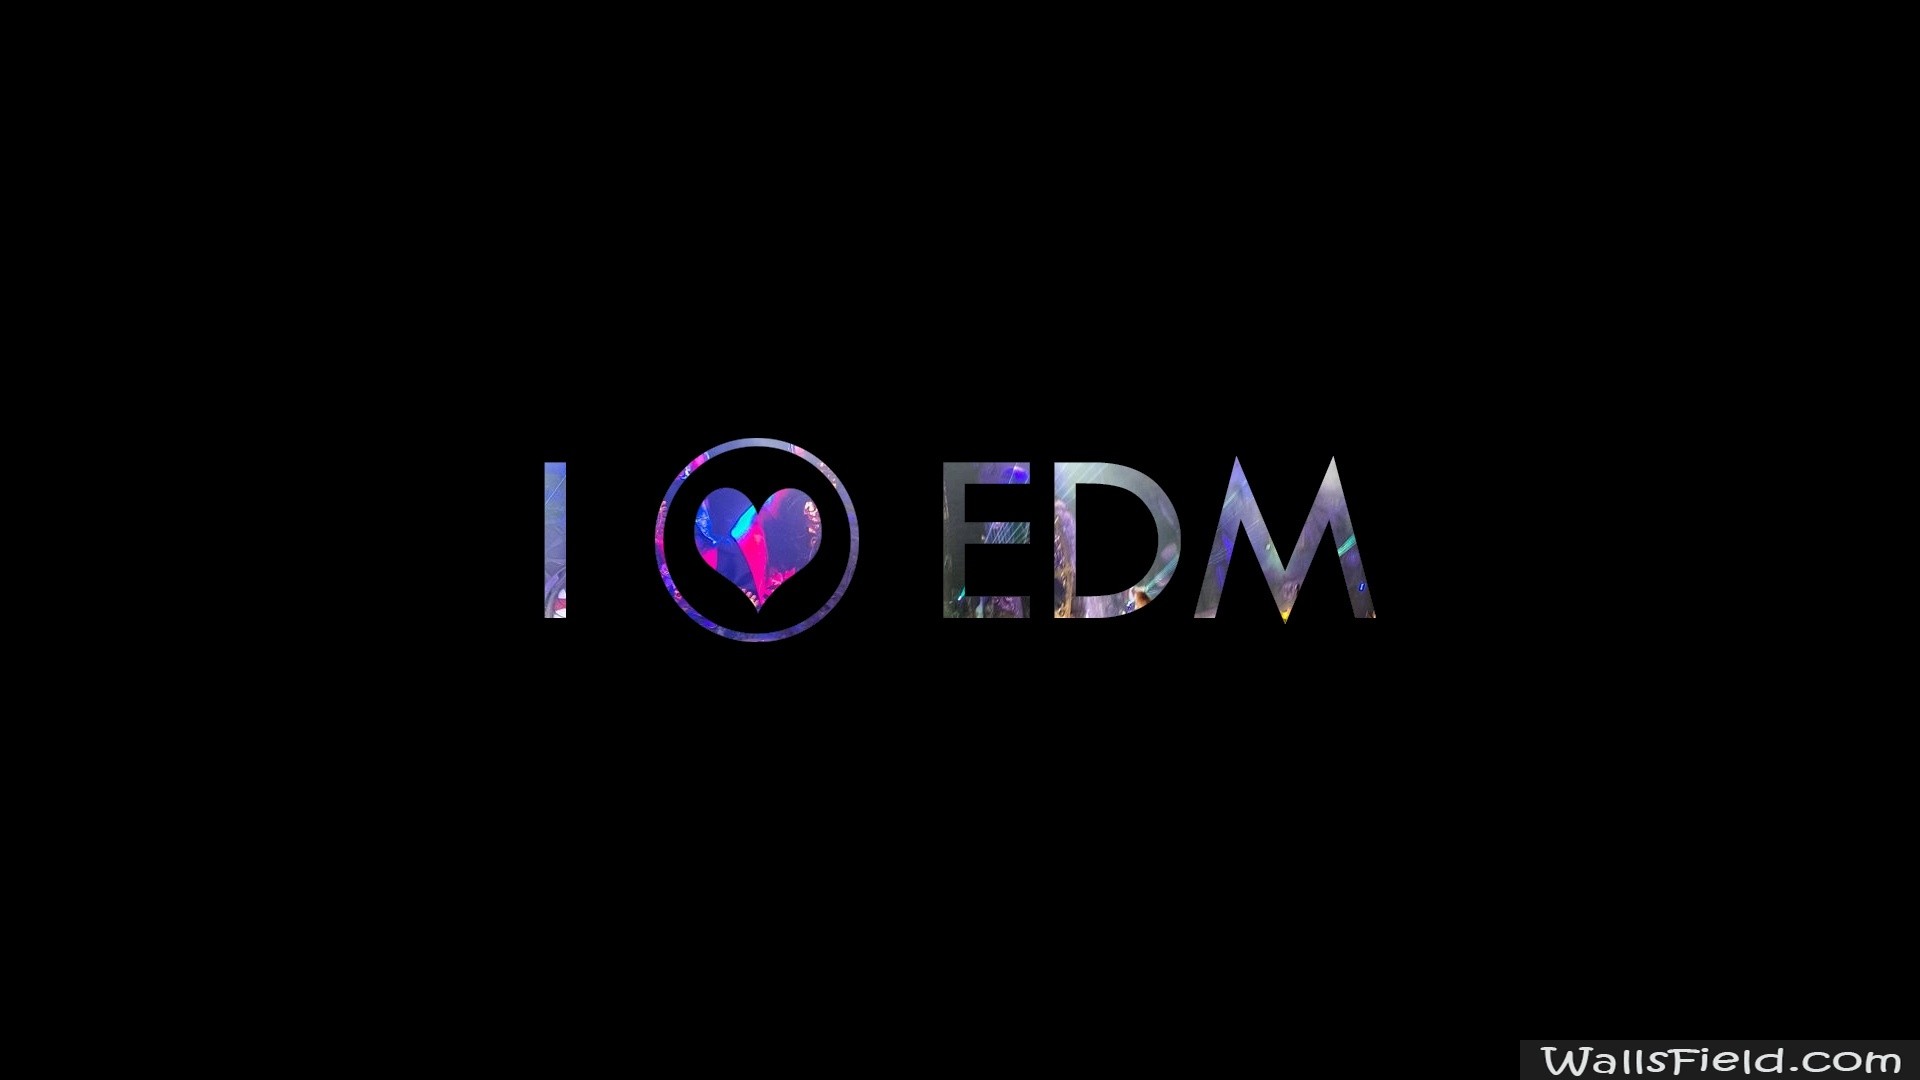 EDM wallpaper ·① Download free beautiful High Resolution backgrounds for desktop and mobile ...